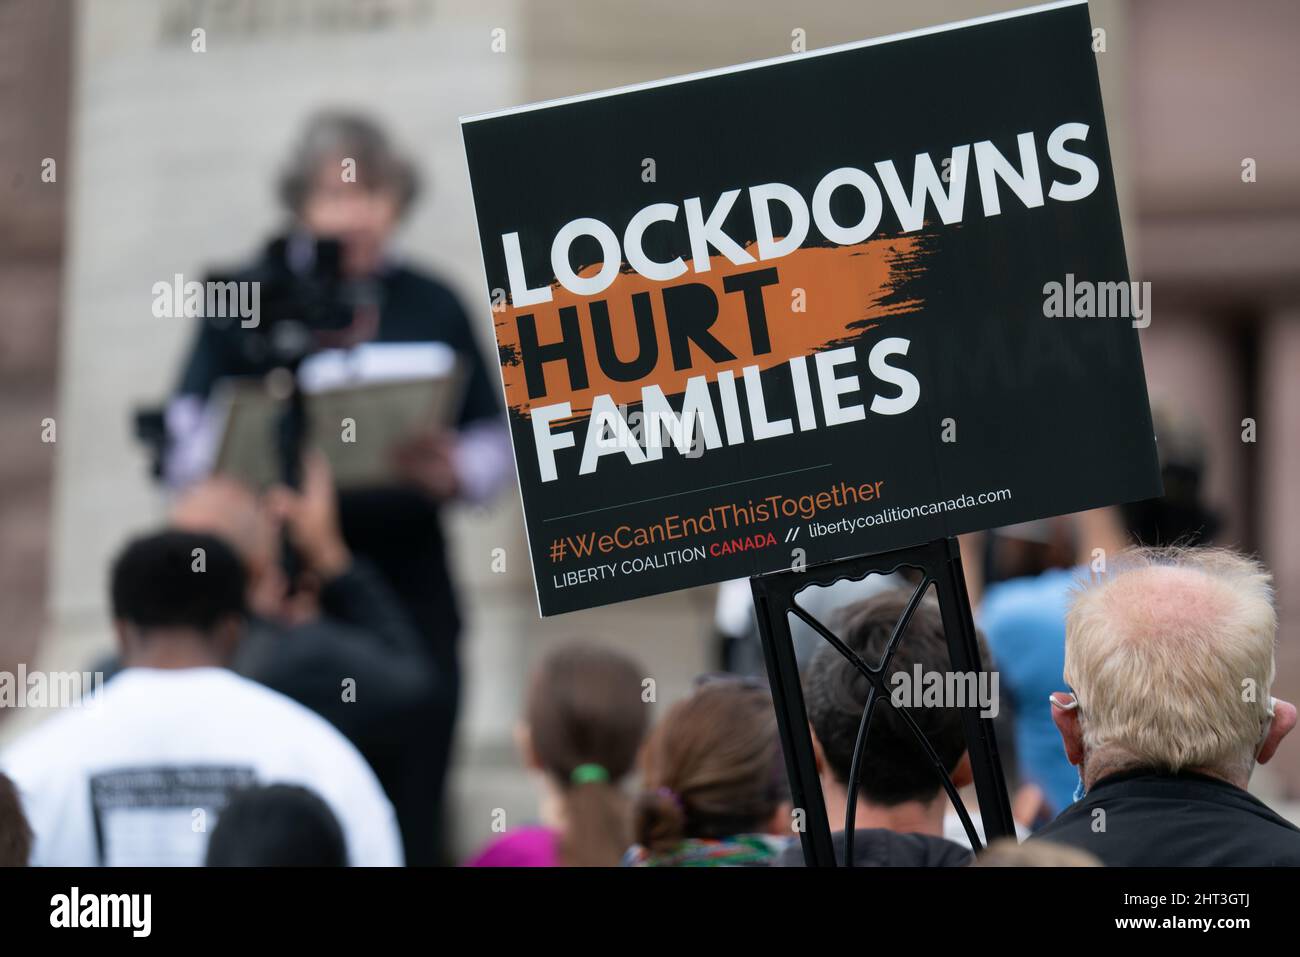 Lockdowns Hurt Families Liberty Coalition Canada anti mask and lockdown sign in Toronto crowd. Stock Photo